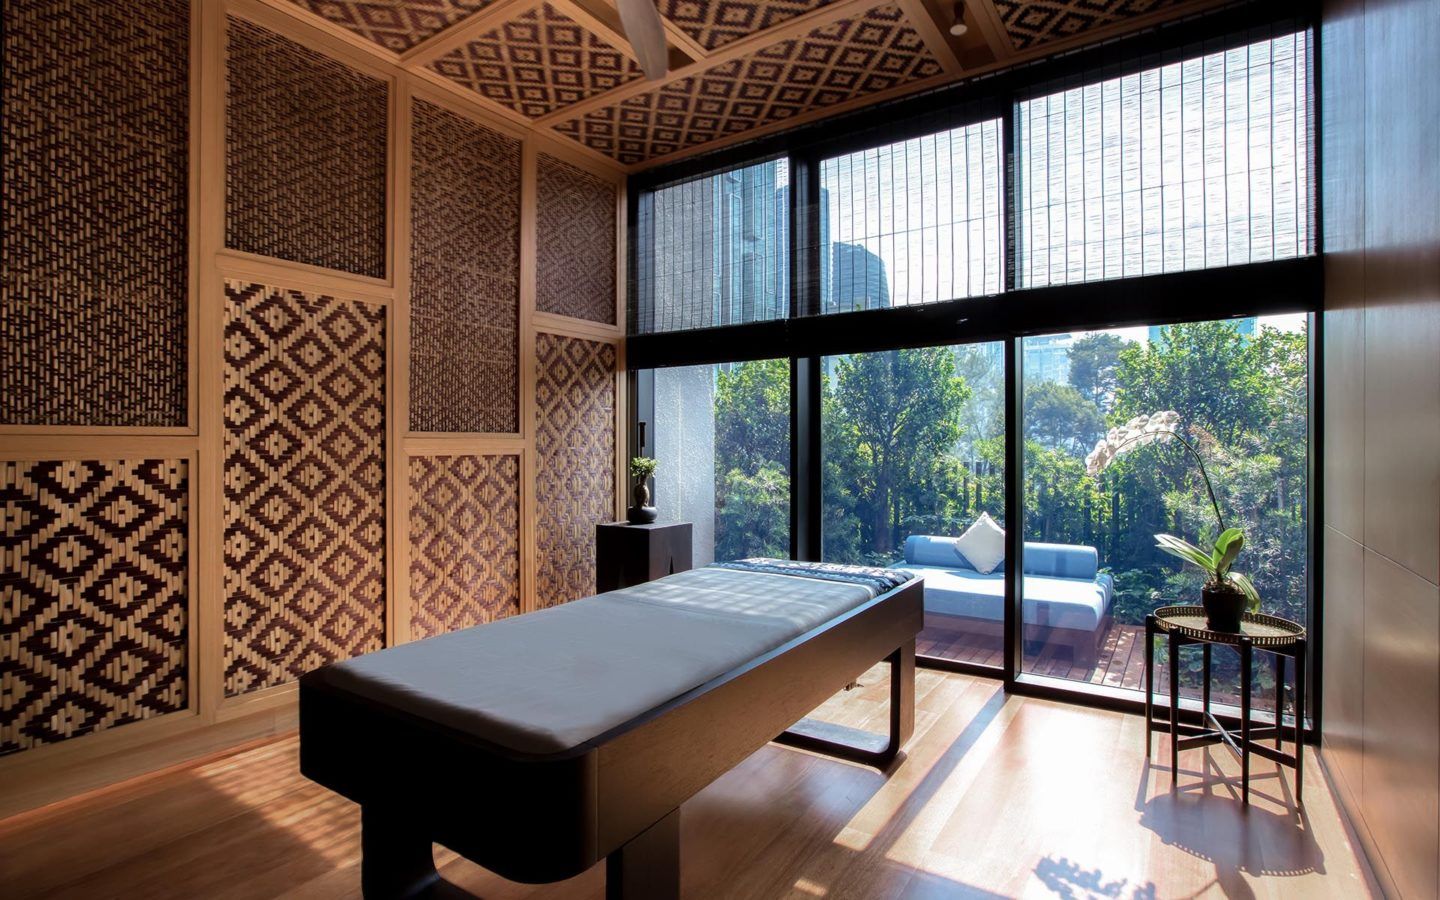 The best hotel spas in KL to book yourself a pamper session